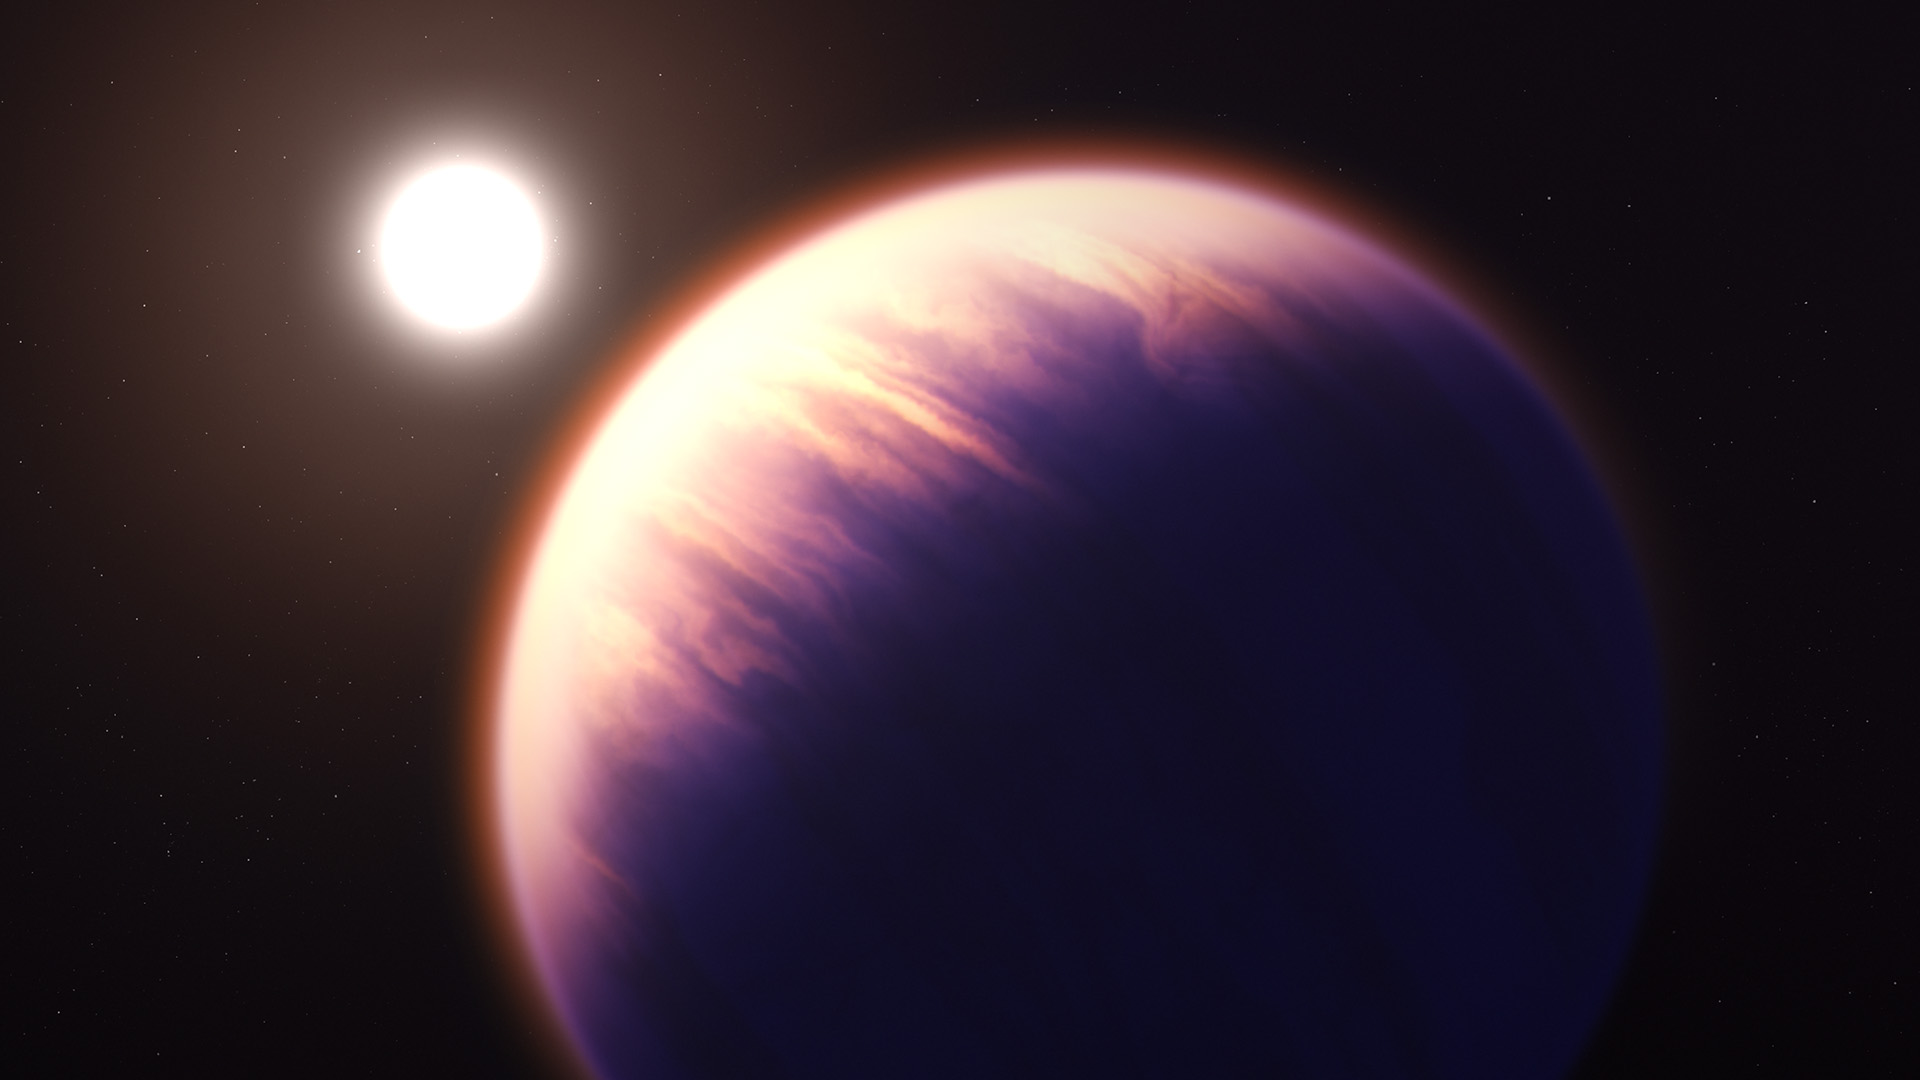 Illustration of a planet and its star on an empty black background. The planet is large, in the foreground at the center and the star is smaller, in the background at the upper left. The planet has a fuzzy orange-blue atmosphere with hints of longitudinal cloud bands below. The left quarter of the planet (the side facing the star) is lit, while the rest is in shadow. The star is bright yellowish-white, with no clear features.